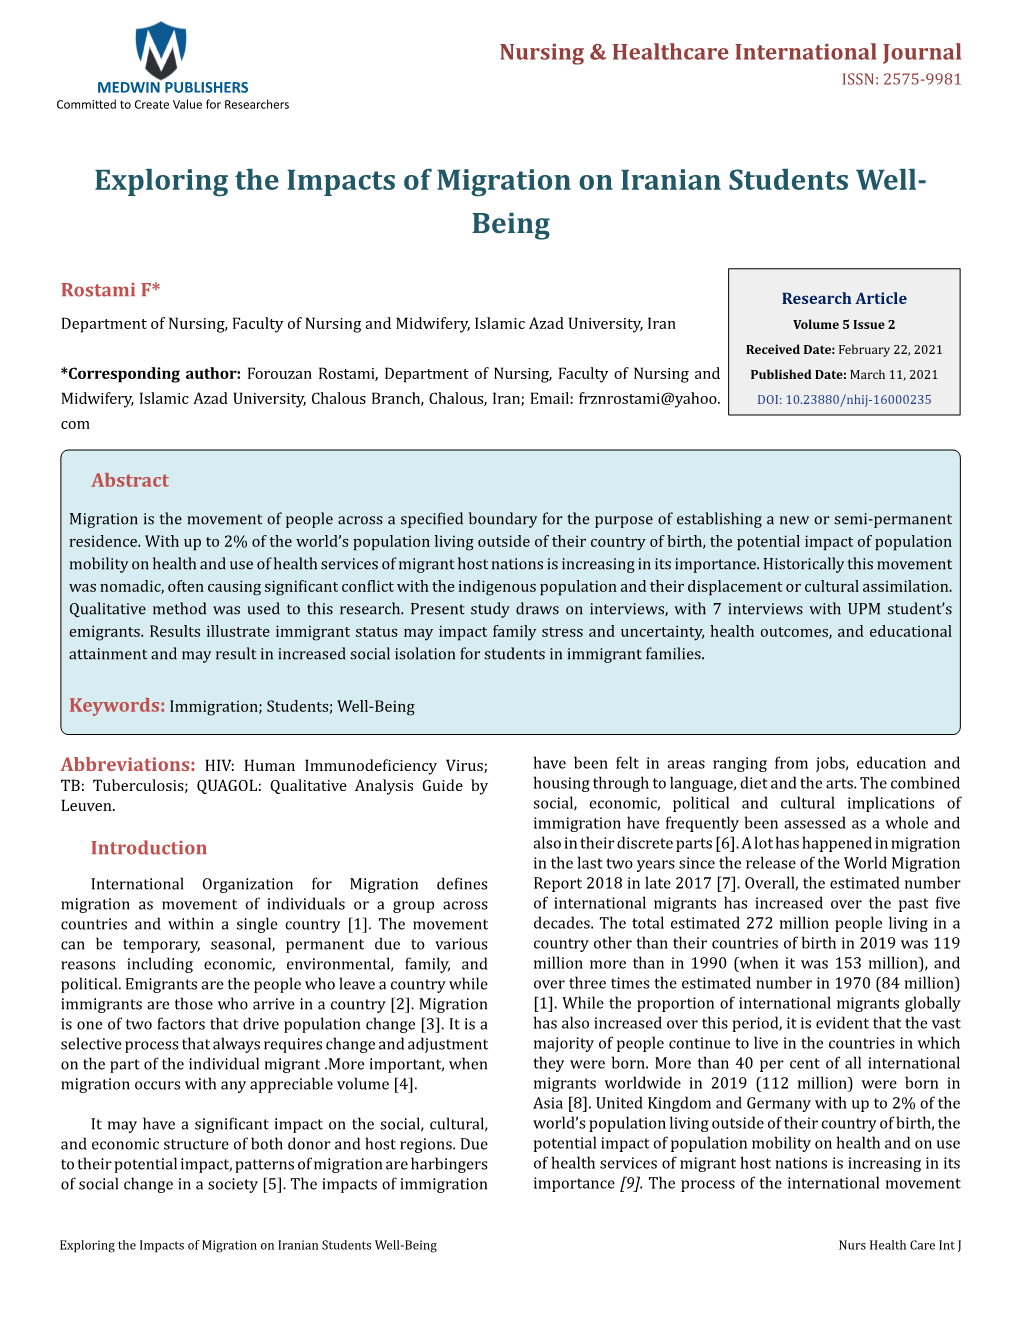 Rostami F. Exploring the Impacts of Migration on Iranian Students Well-Being